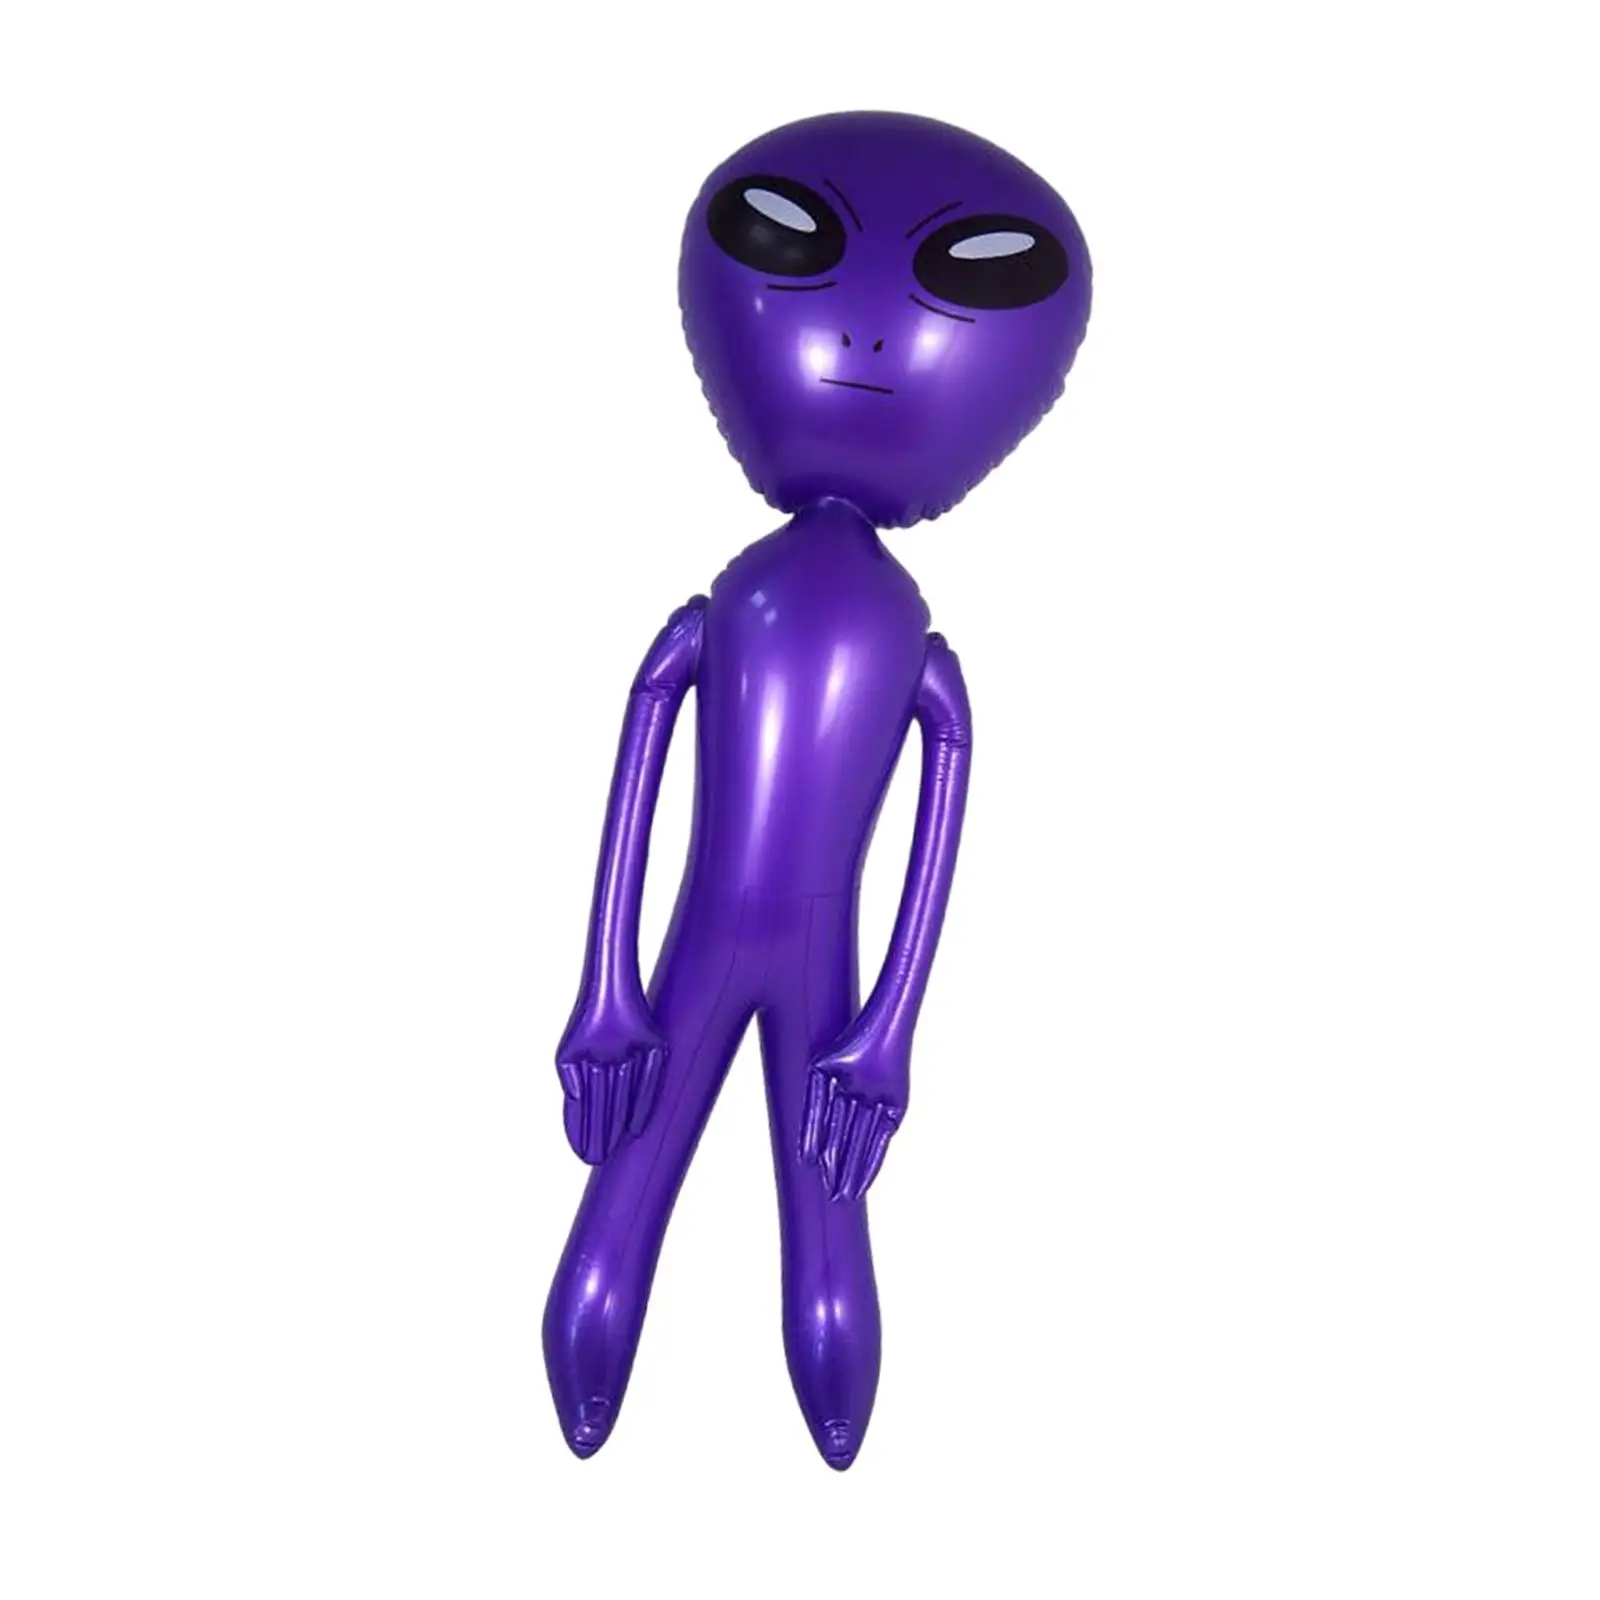 Inflatable Alien Toy Inflatable Figures PVC Alien Balloon for Game Prize Alien Theme Party Halloween Festival Garden Decoration